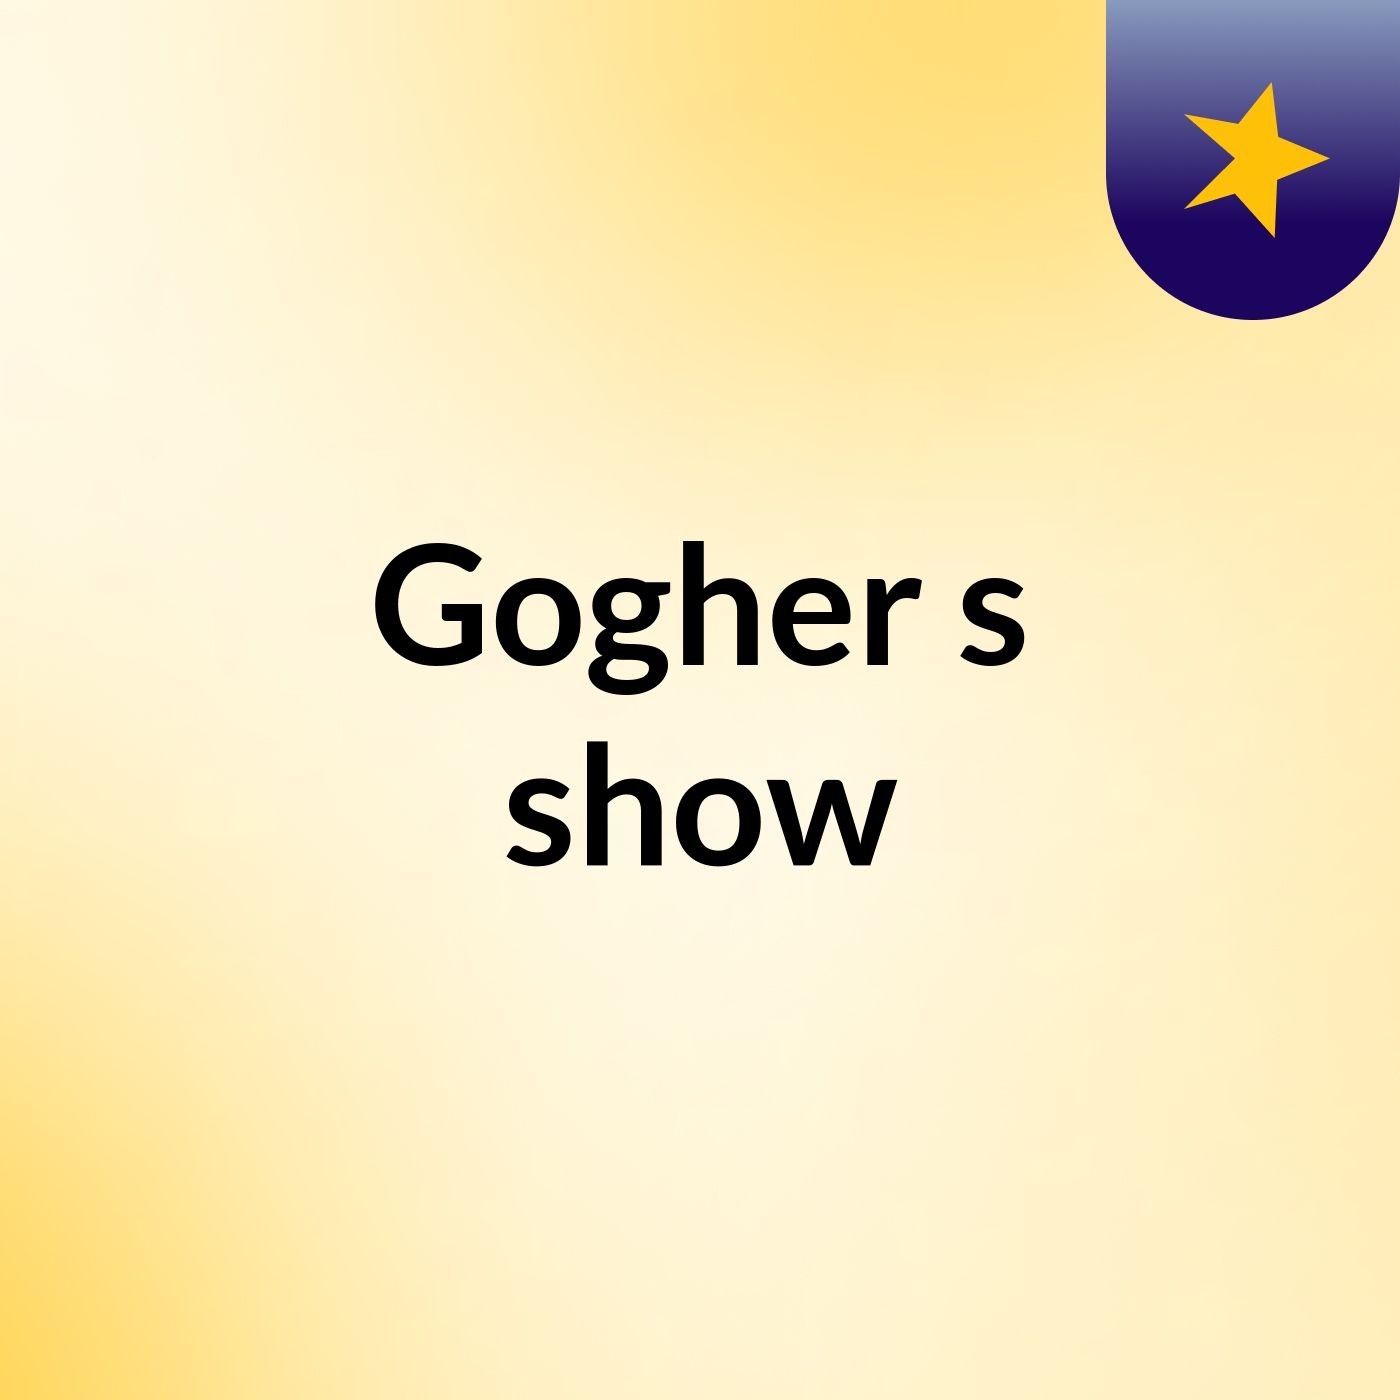 Gogher's show